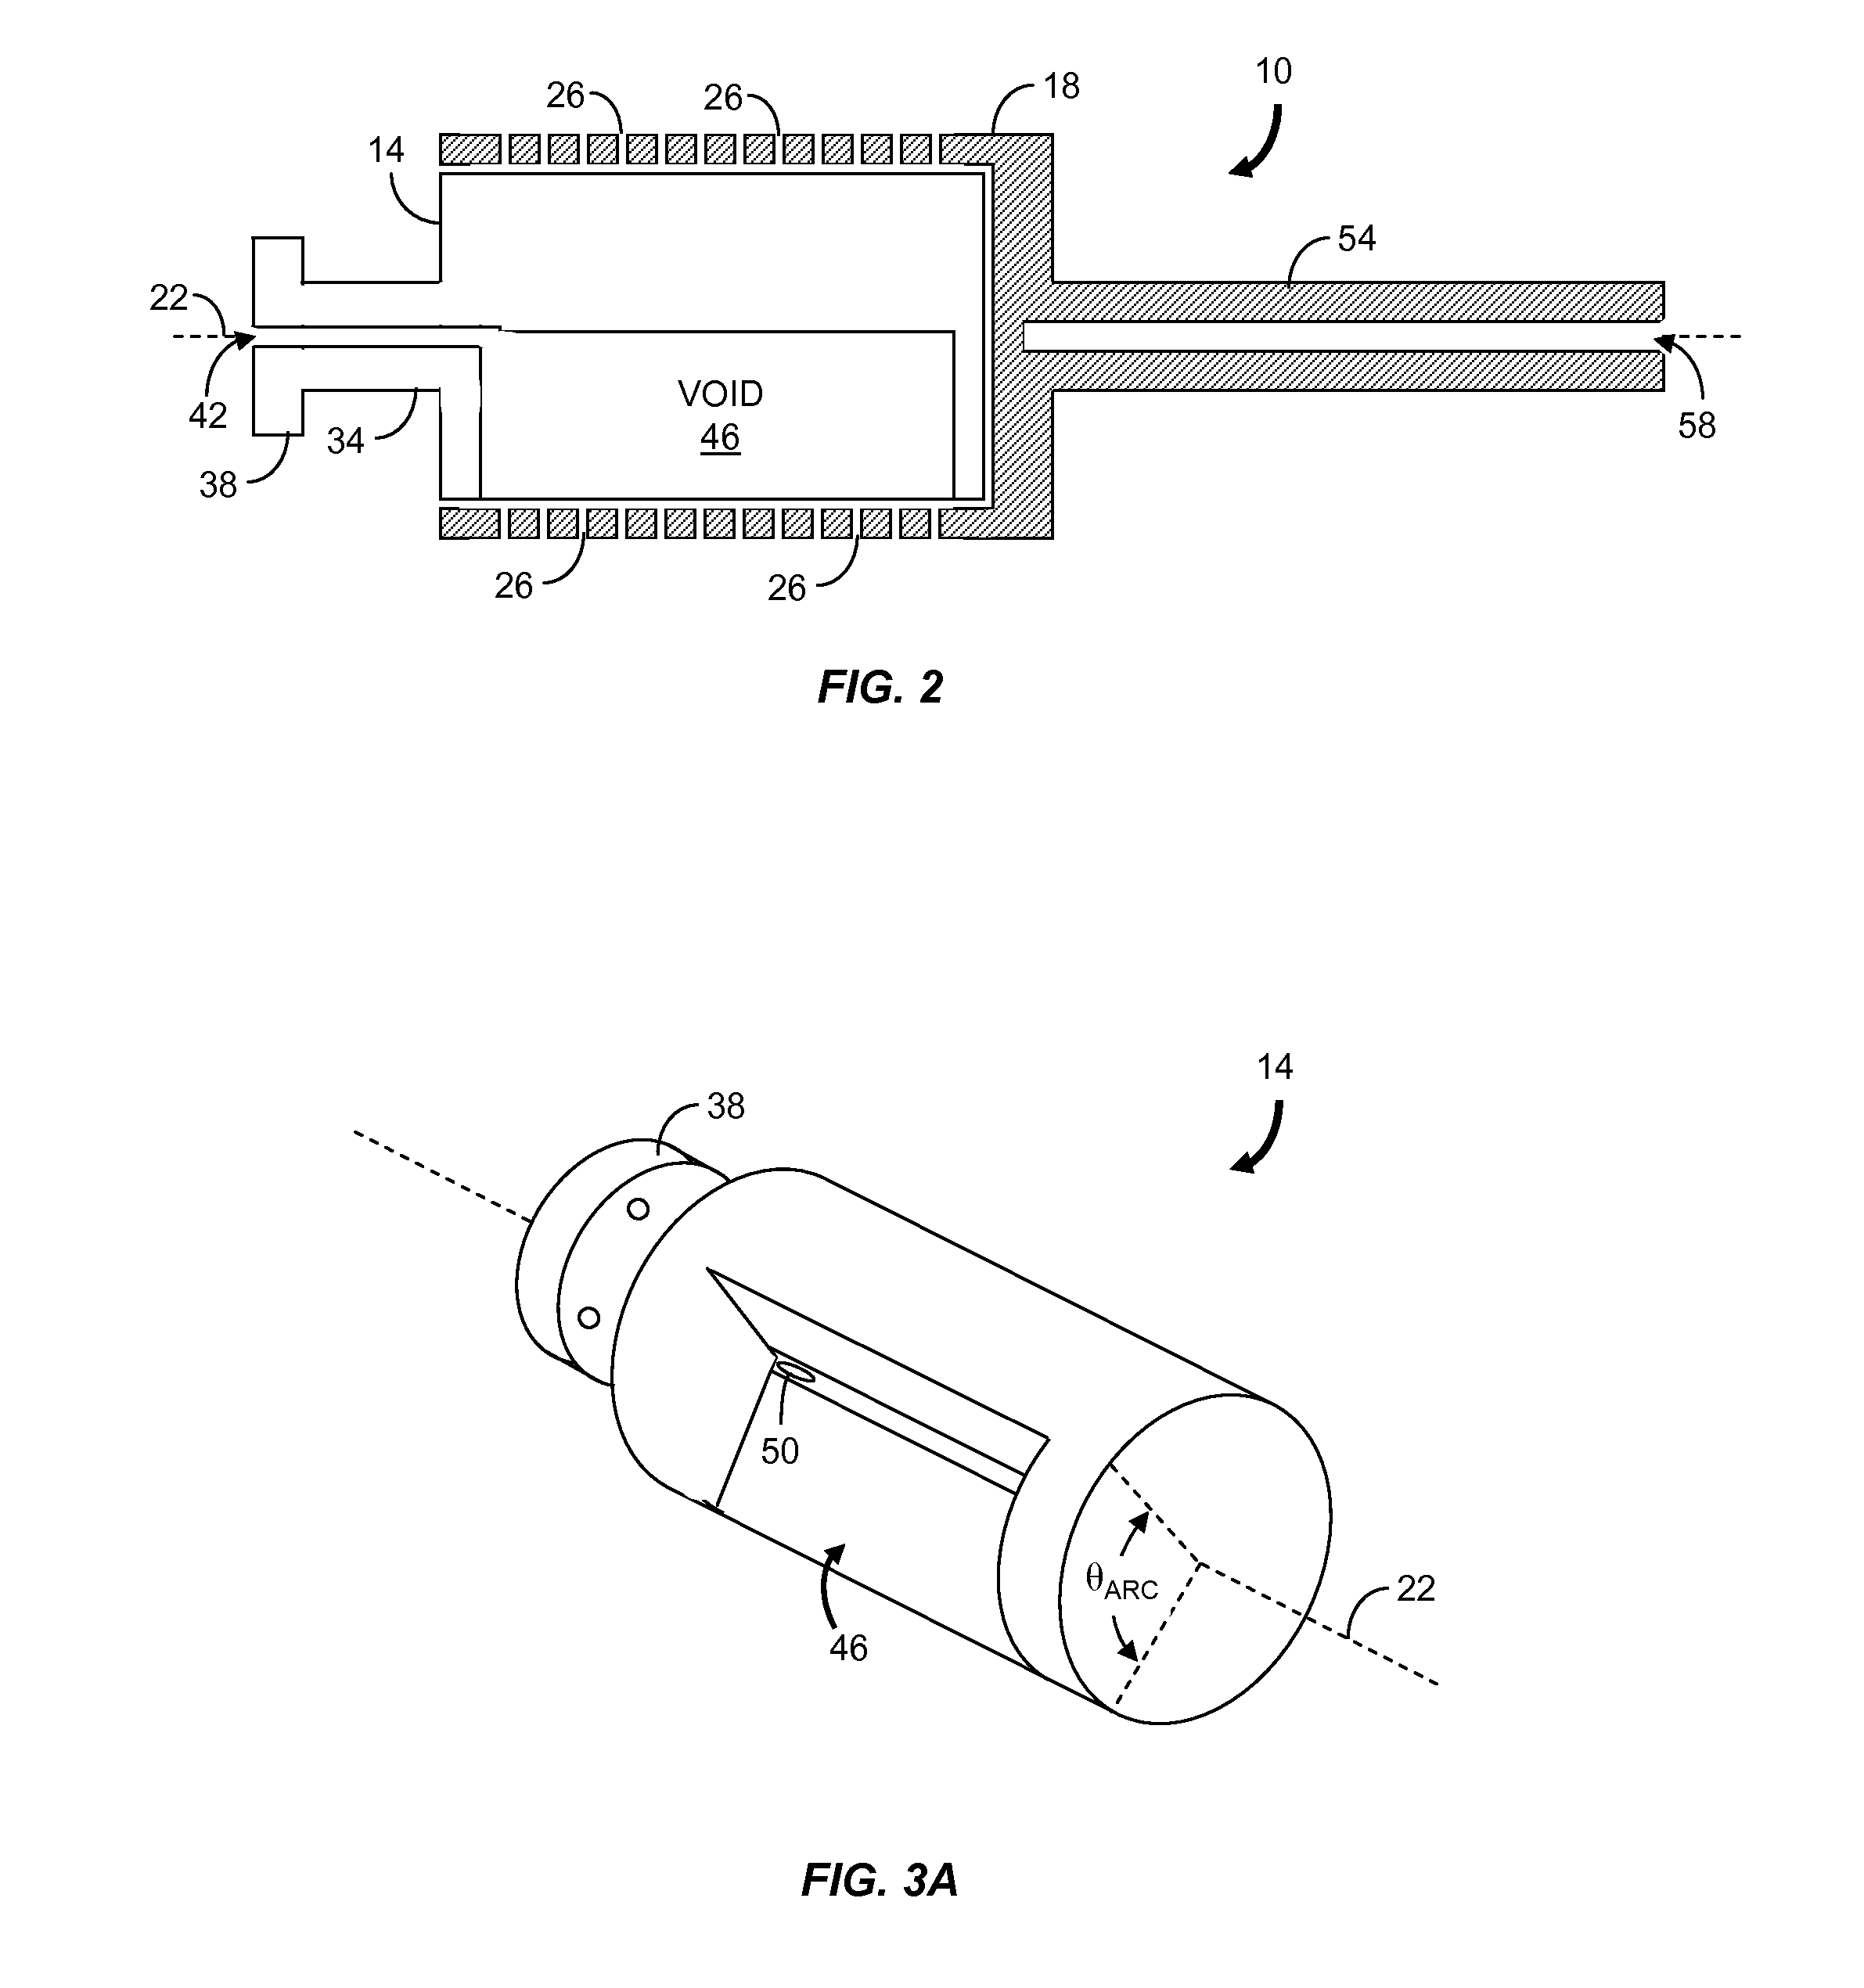 Cooling apparatus for a web deposition system